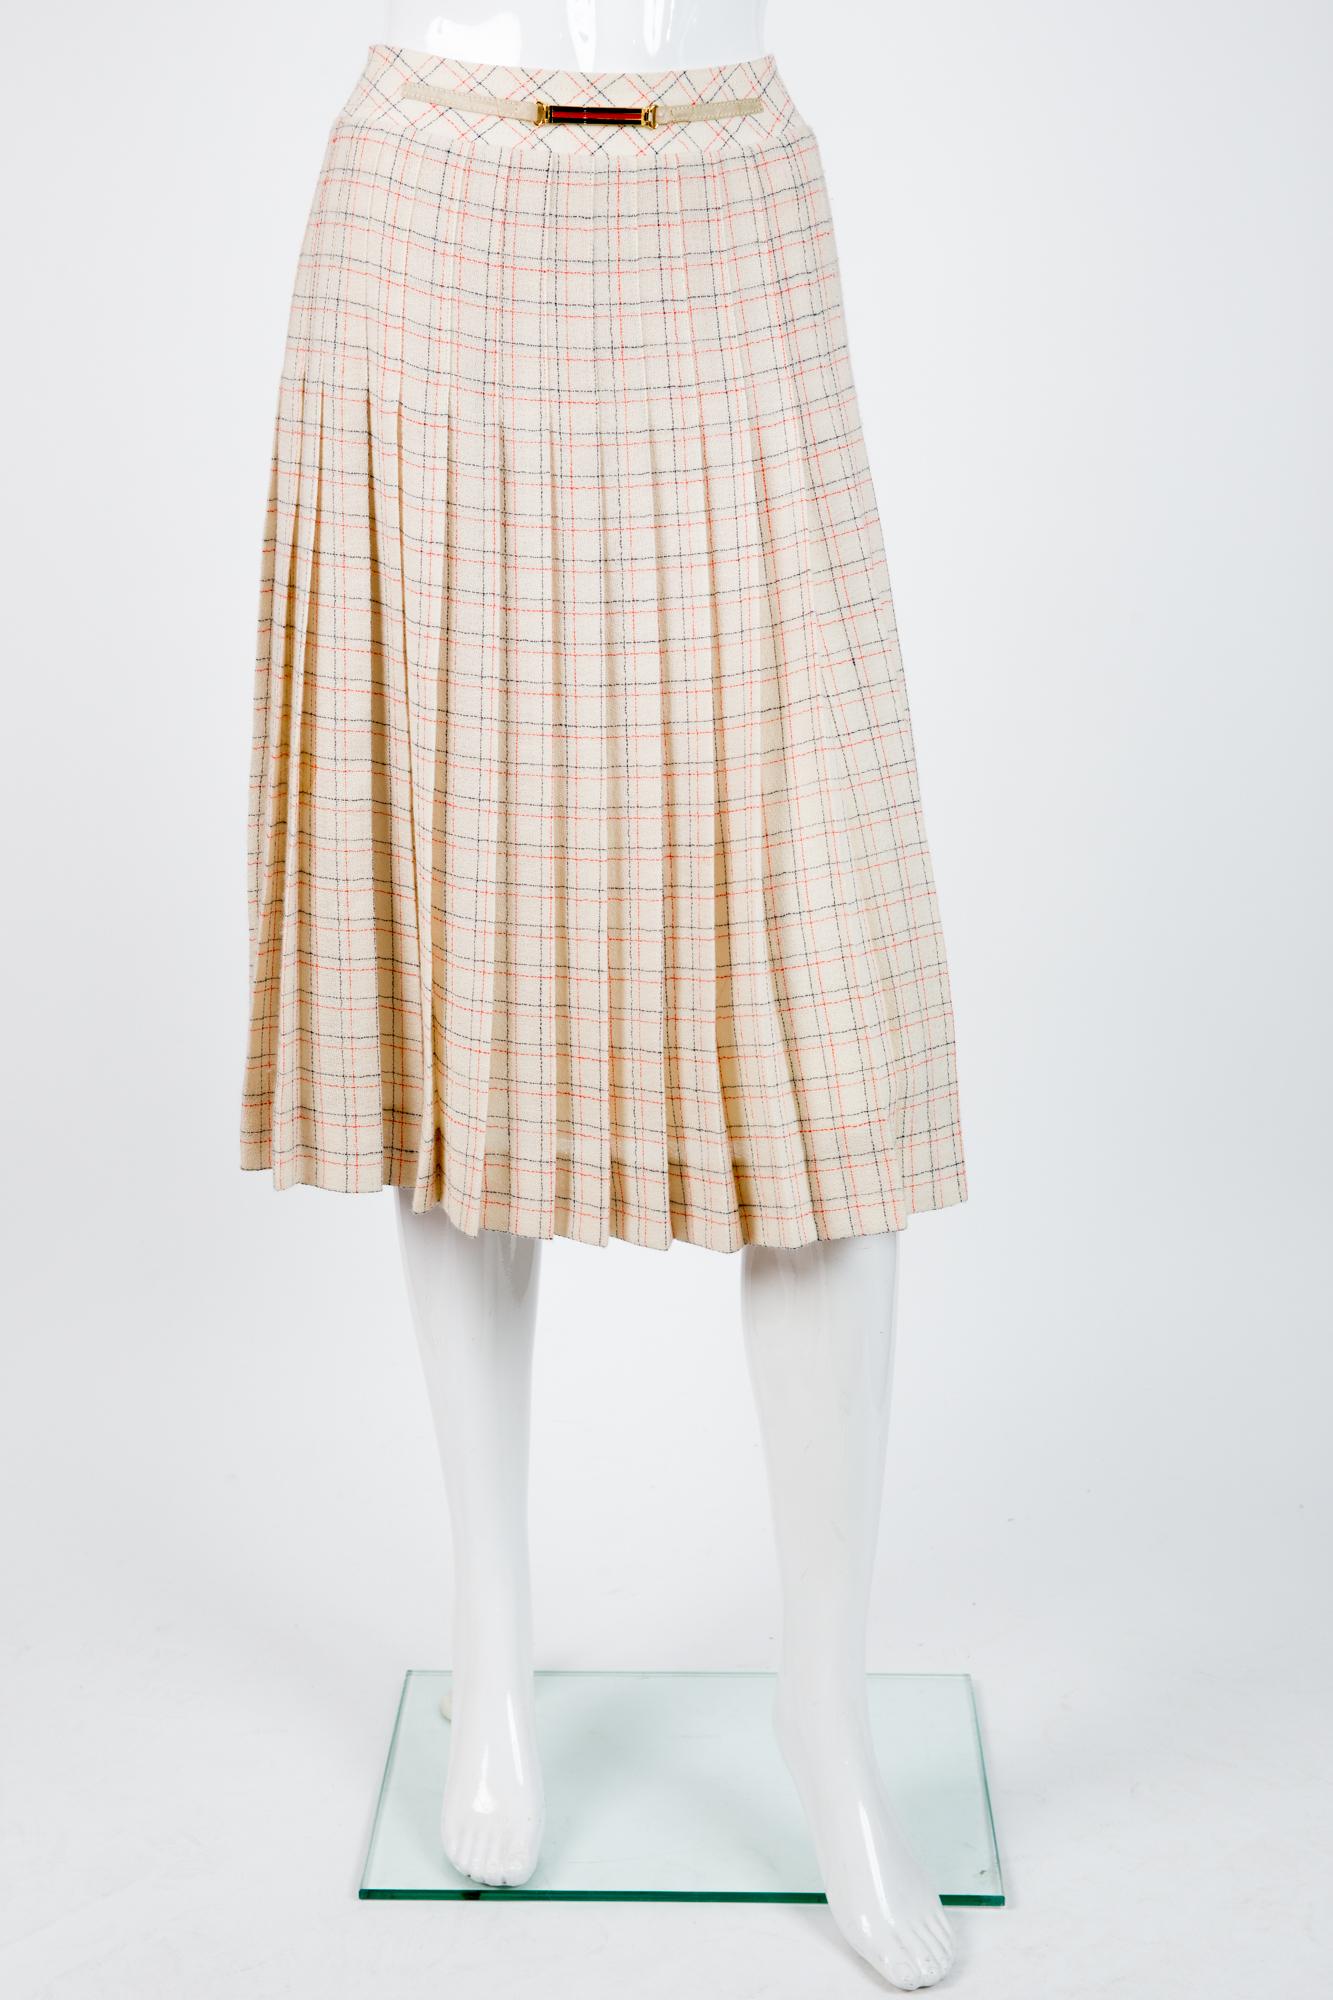 Celine ivory wool skirt featuring a navy and red check pattern, a center back zip, a front leather and music buckle, a logo lining. 
80% wool
20% polyamide
In excellent vintage condition. Made in France.
Label size 38fr/US6 /UK10 but can fit a 36fr/